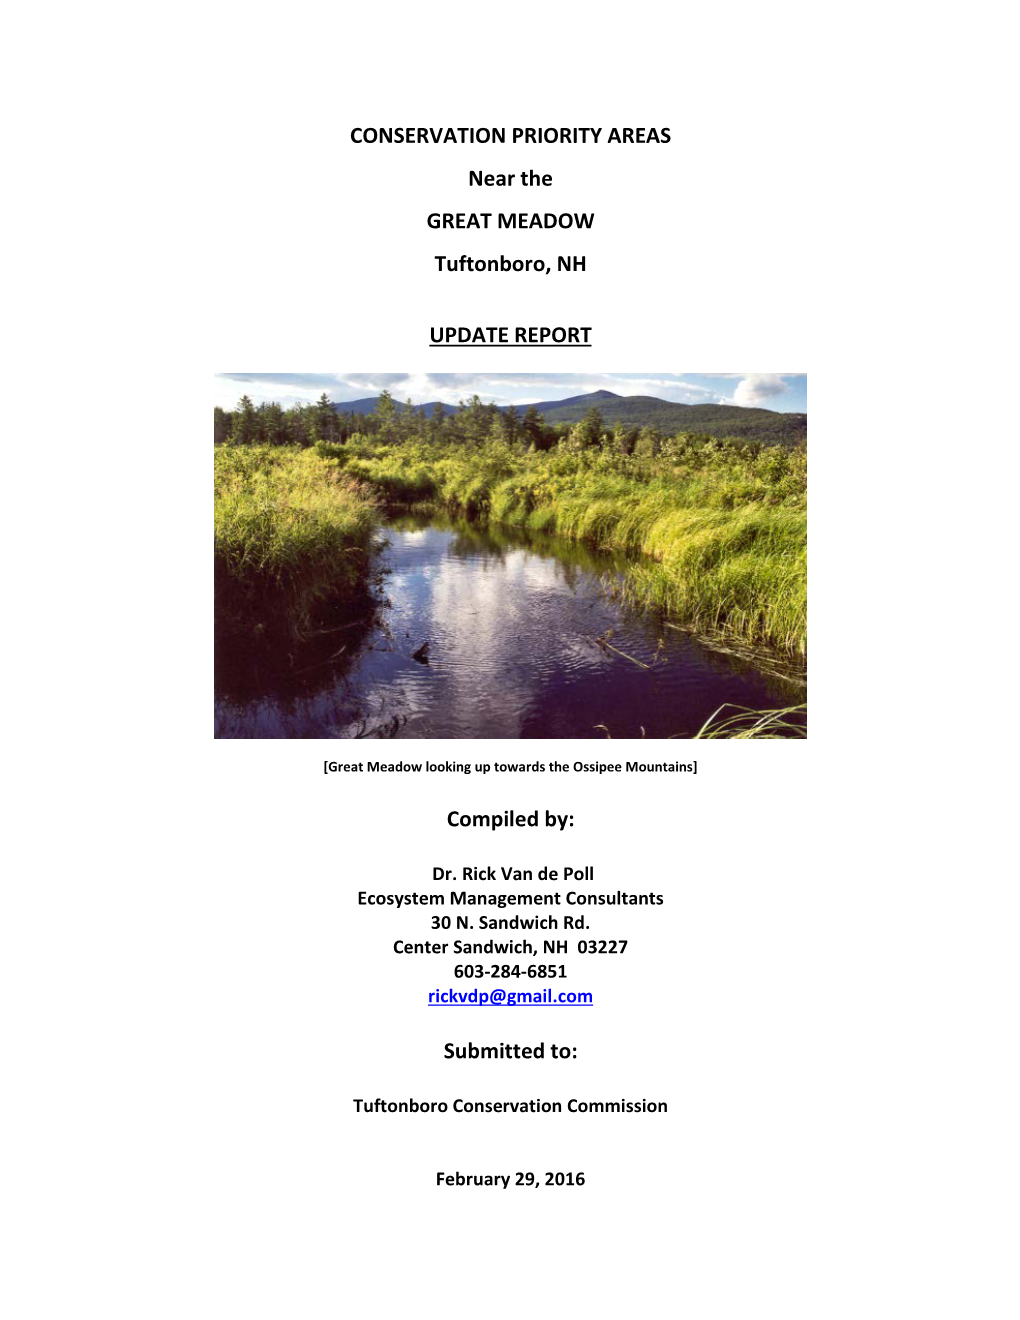 CONSERVATION PRIORITY AREAS Near the GREAT MEADOW Tuftonboro, NH UPDATE REPORT